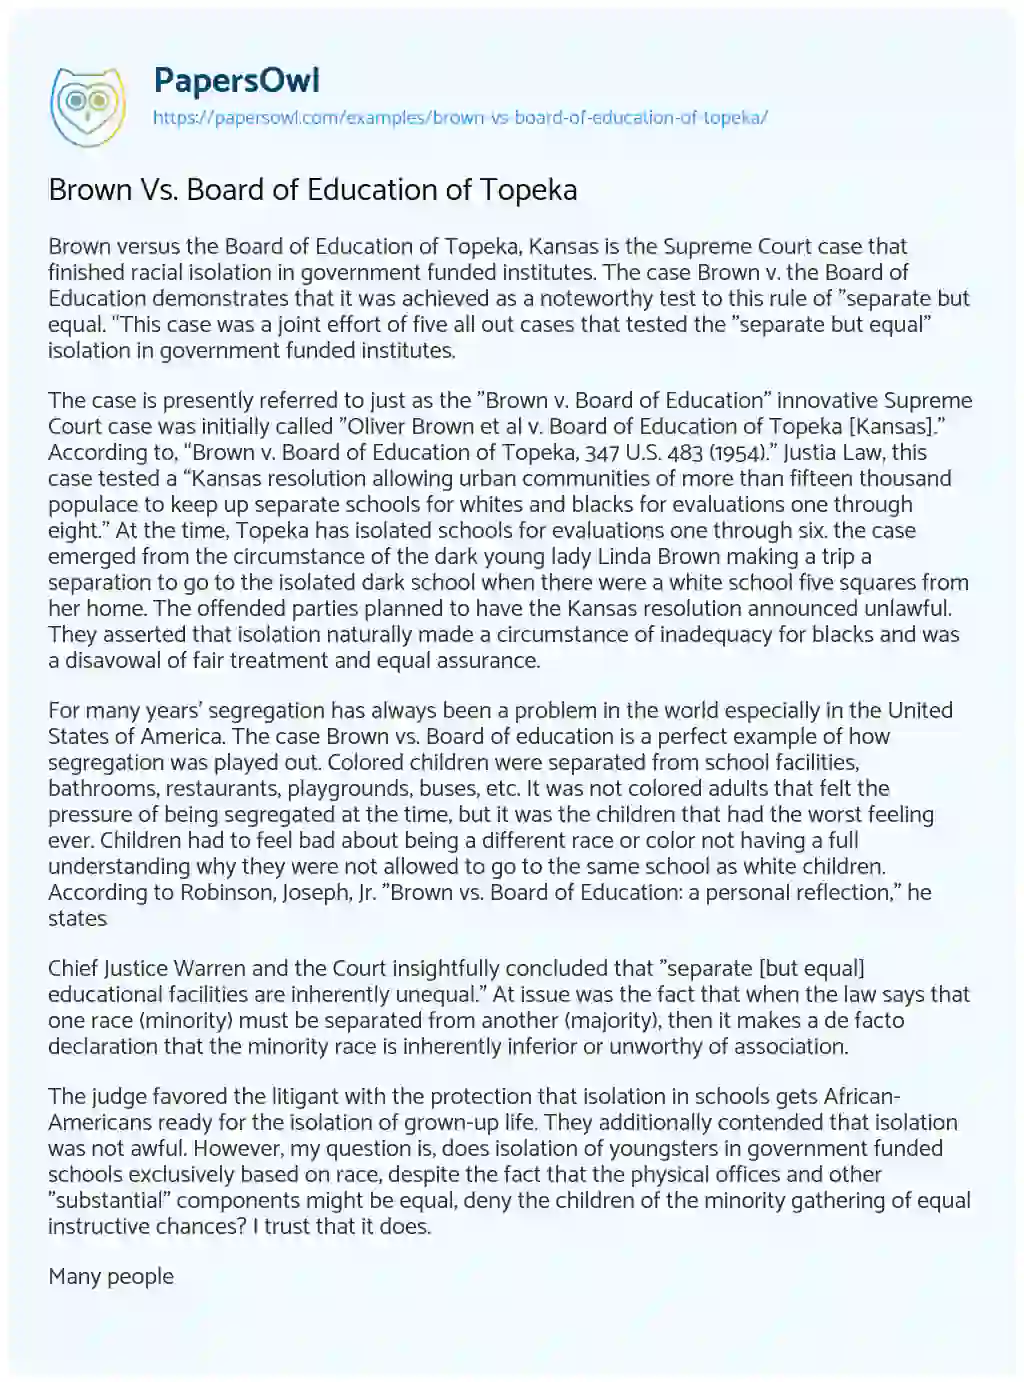 Essay on Brown Vs. Board of Education of Topeka